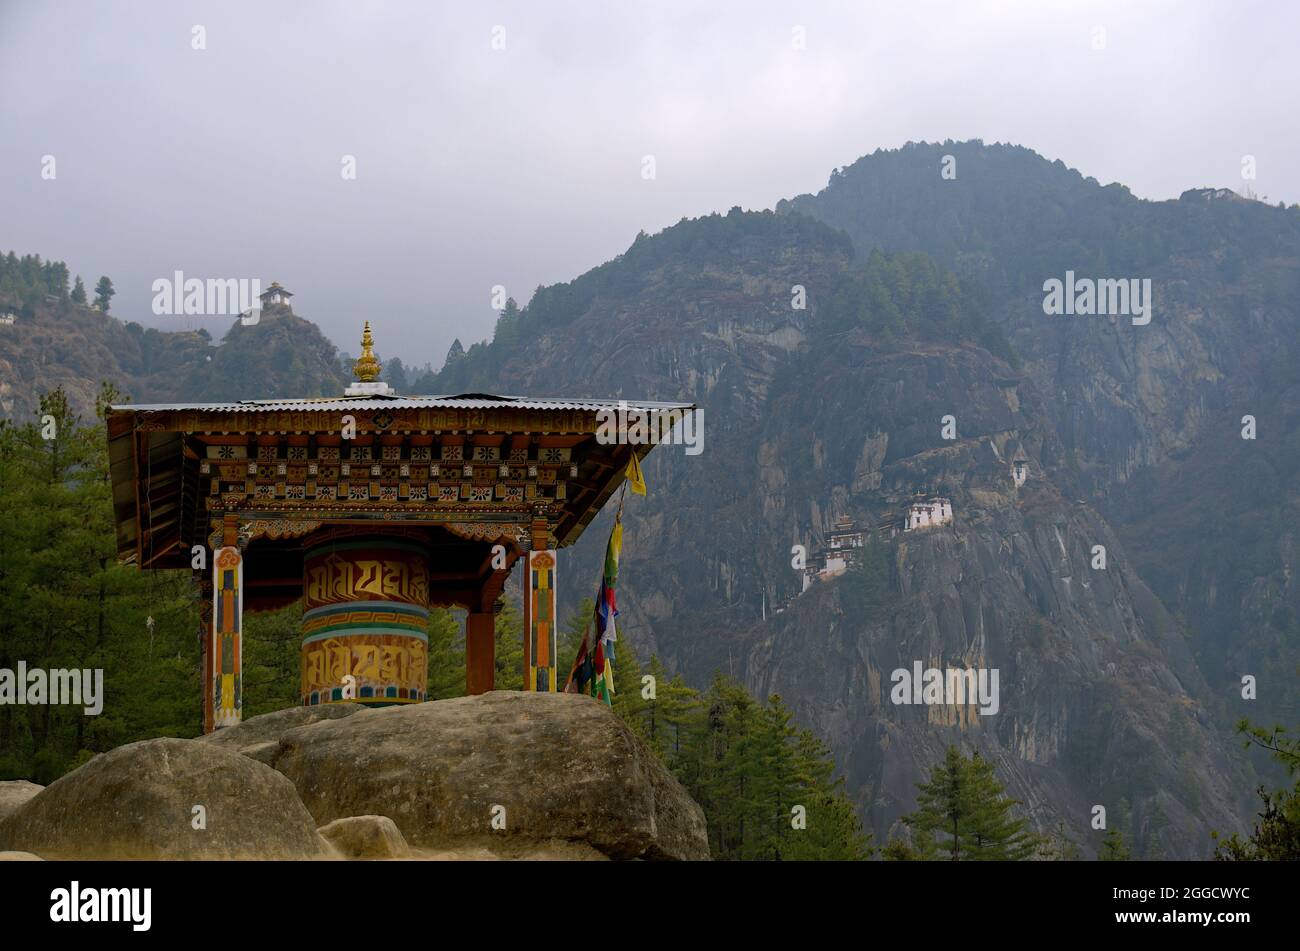 Large Tibetan 'Mani' Prayer Wheel along trail to Paro Taktsang or Tiger's Nest Buddhist Monastery, with the temple complex in the background, Bhutan Stock Photo